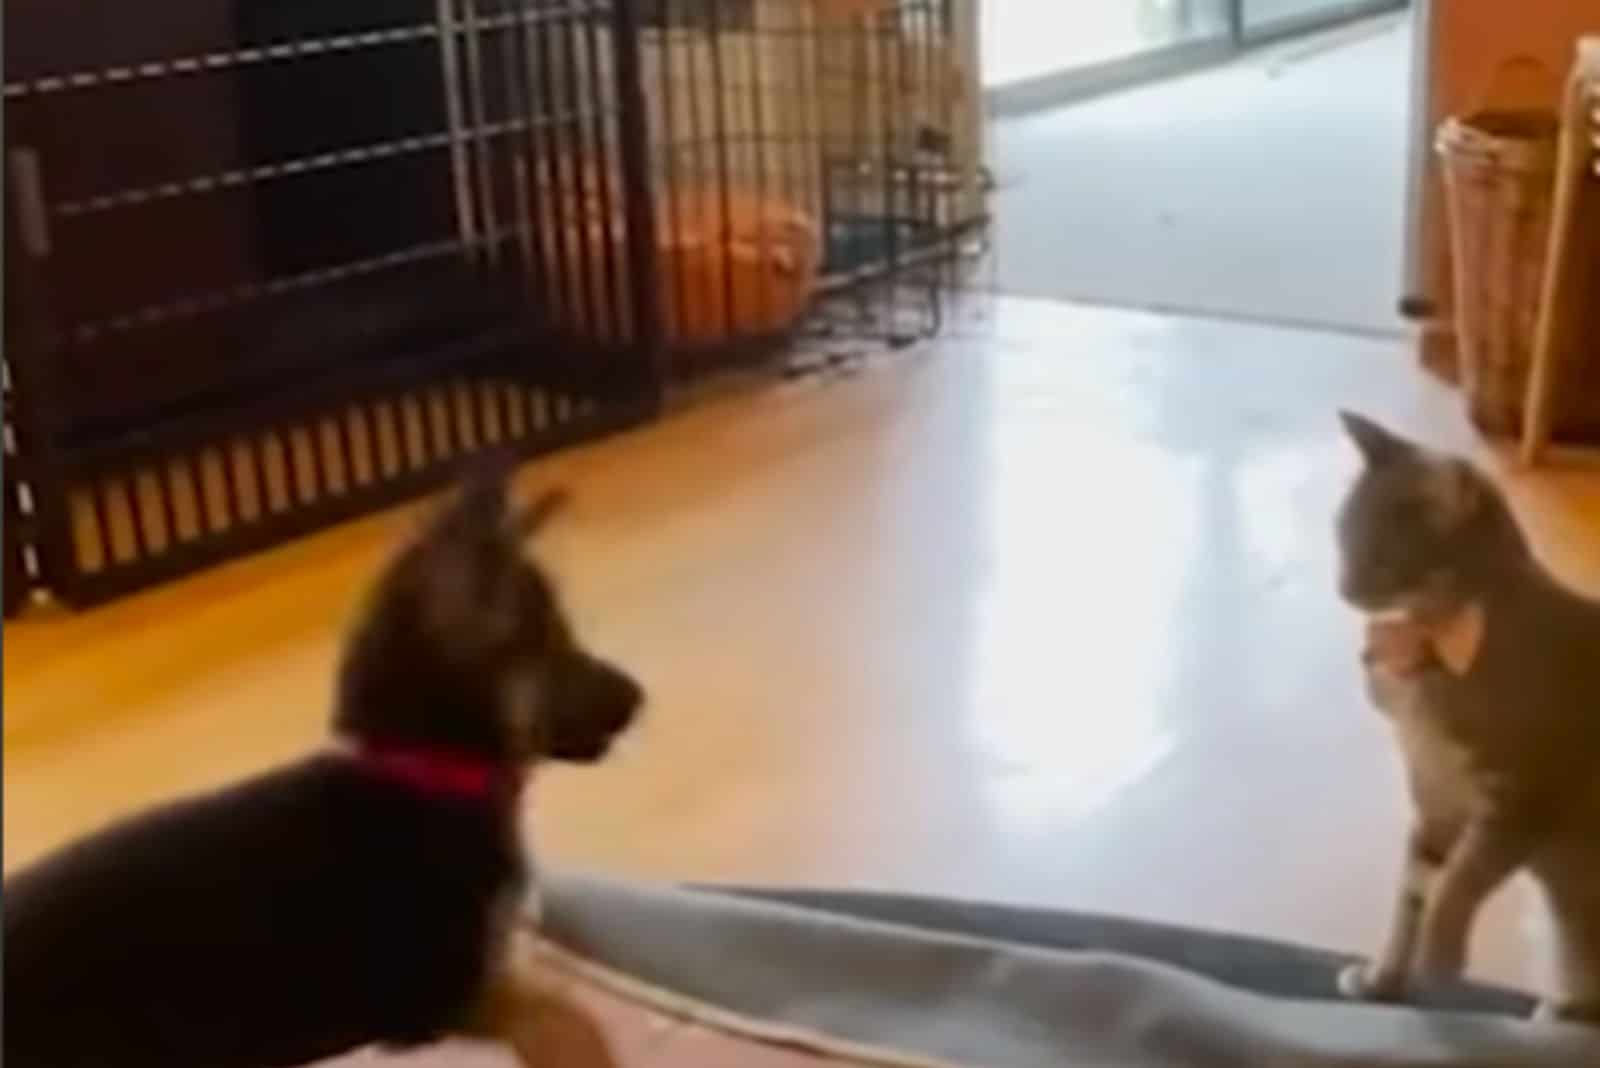 german shepherd puppy and cat looking at each other